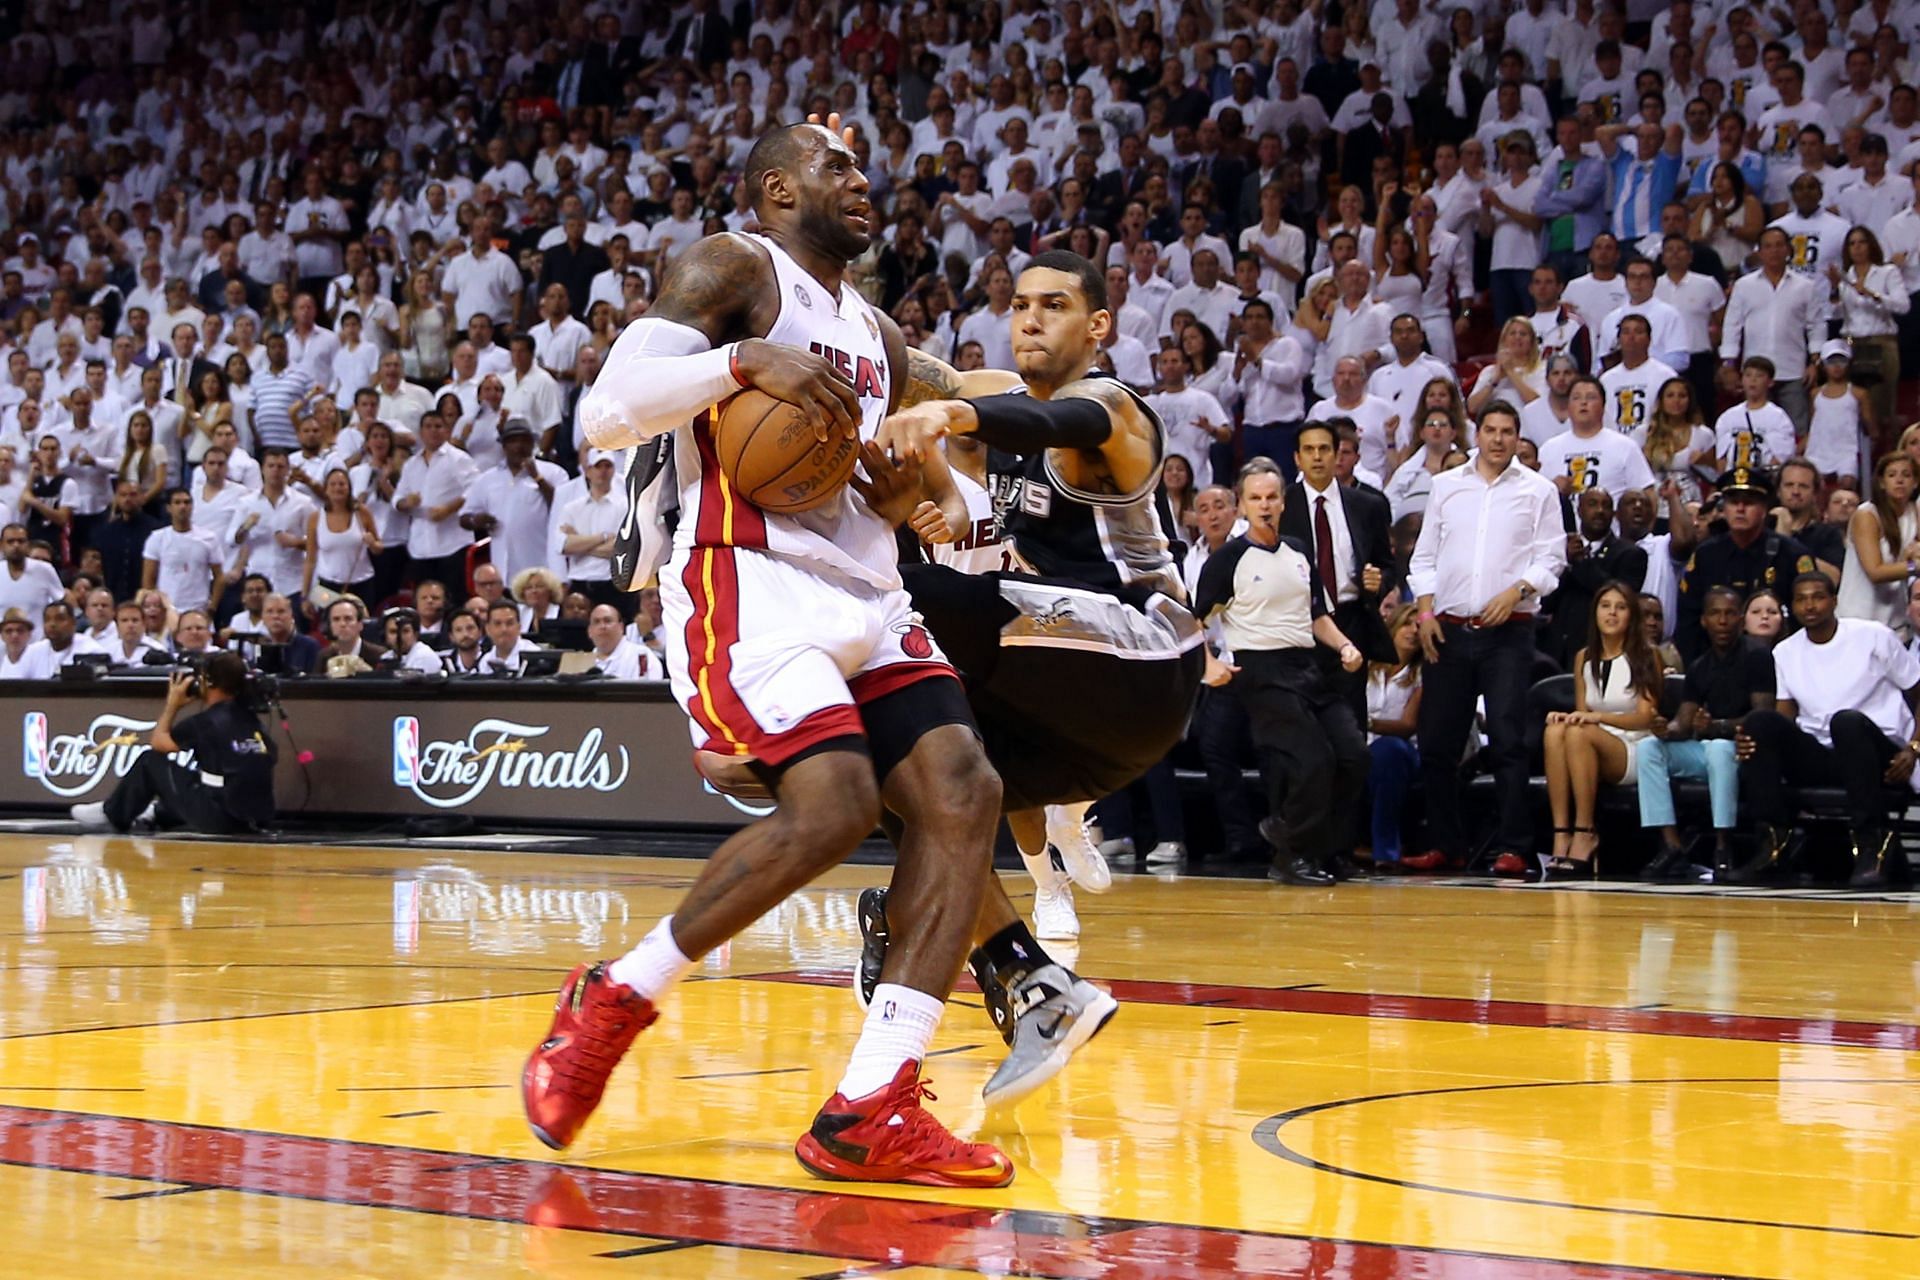 LeBron James #6 of the Miami Heat goes up for a shot - 2013 NBA Finals.